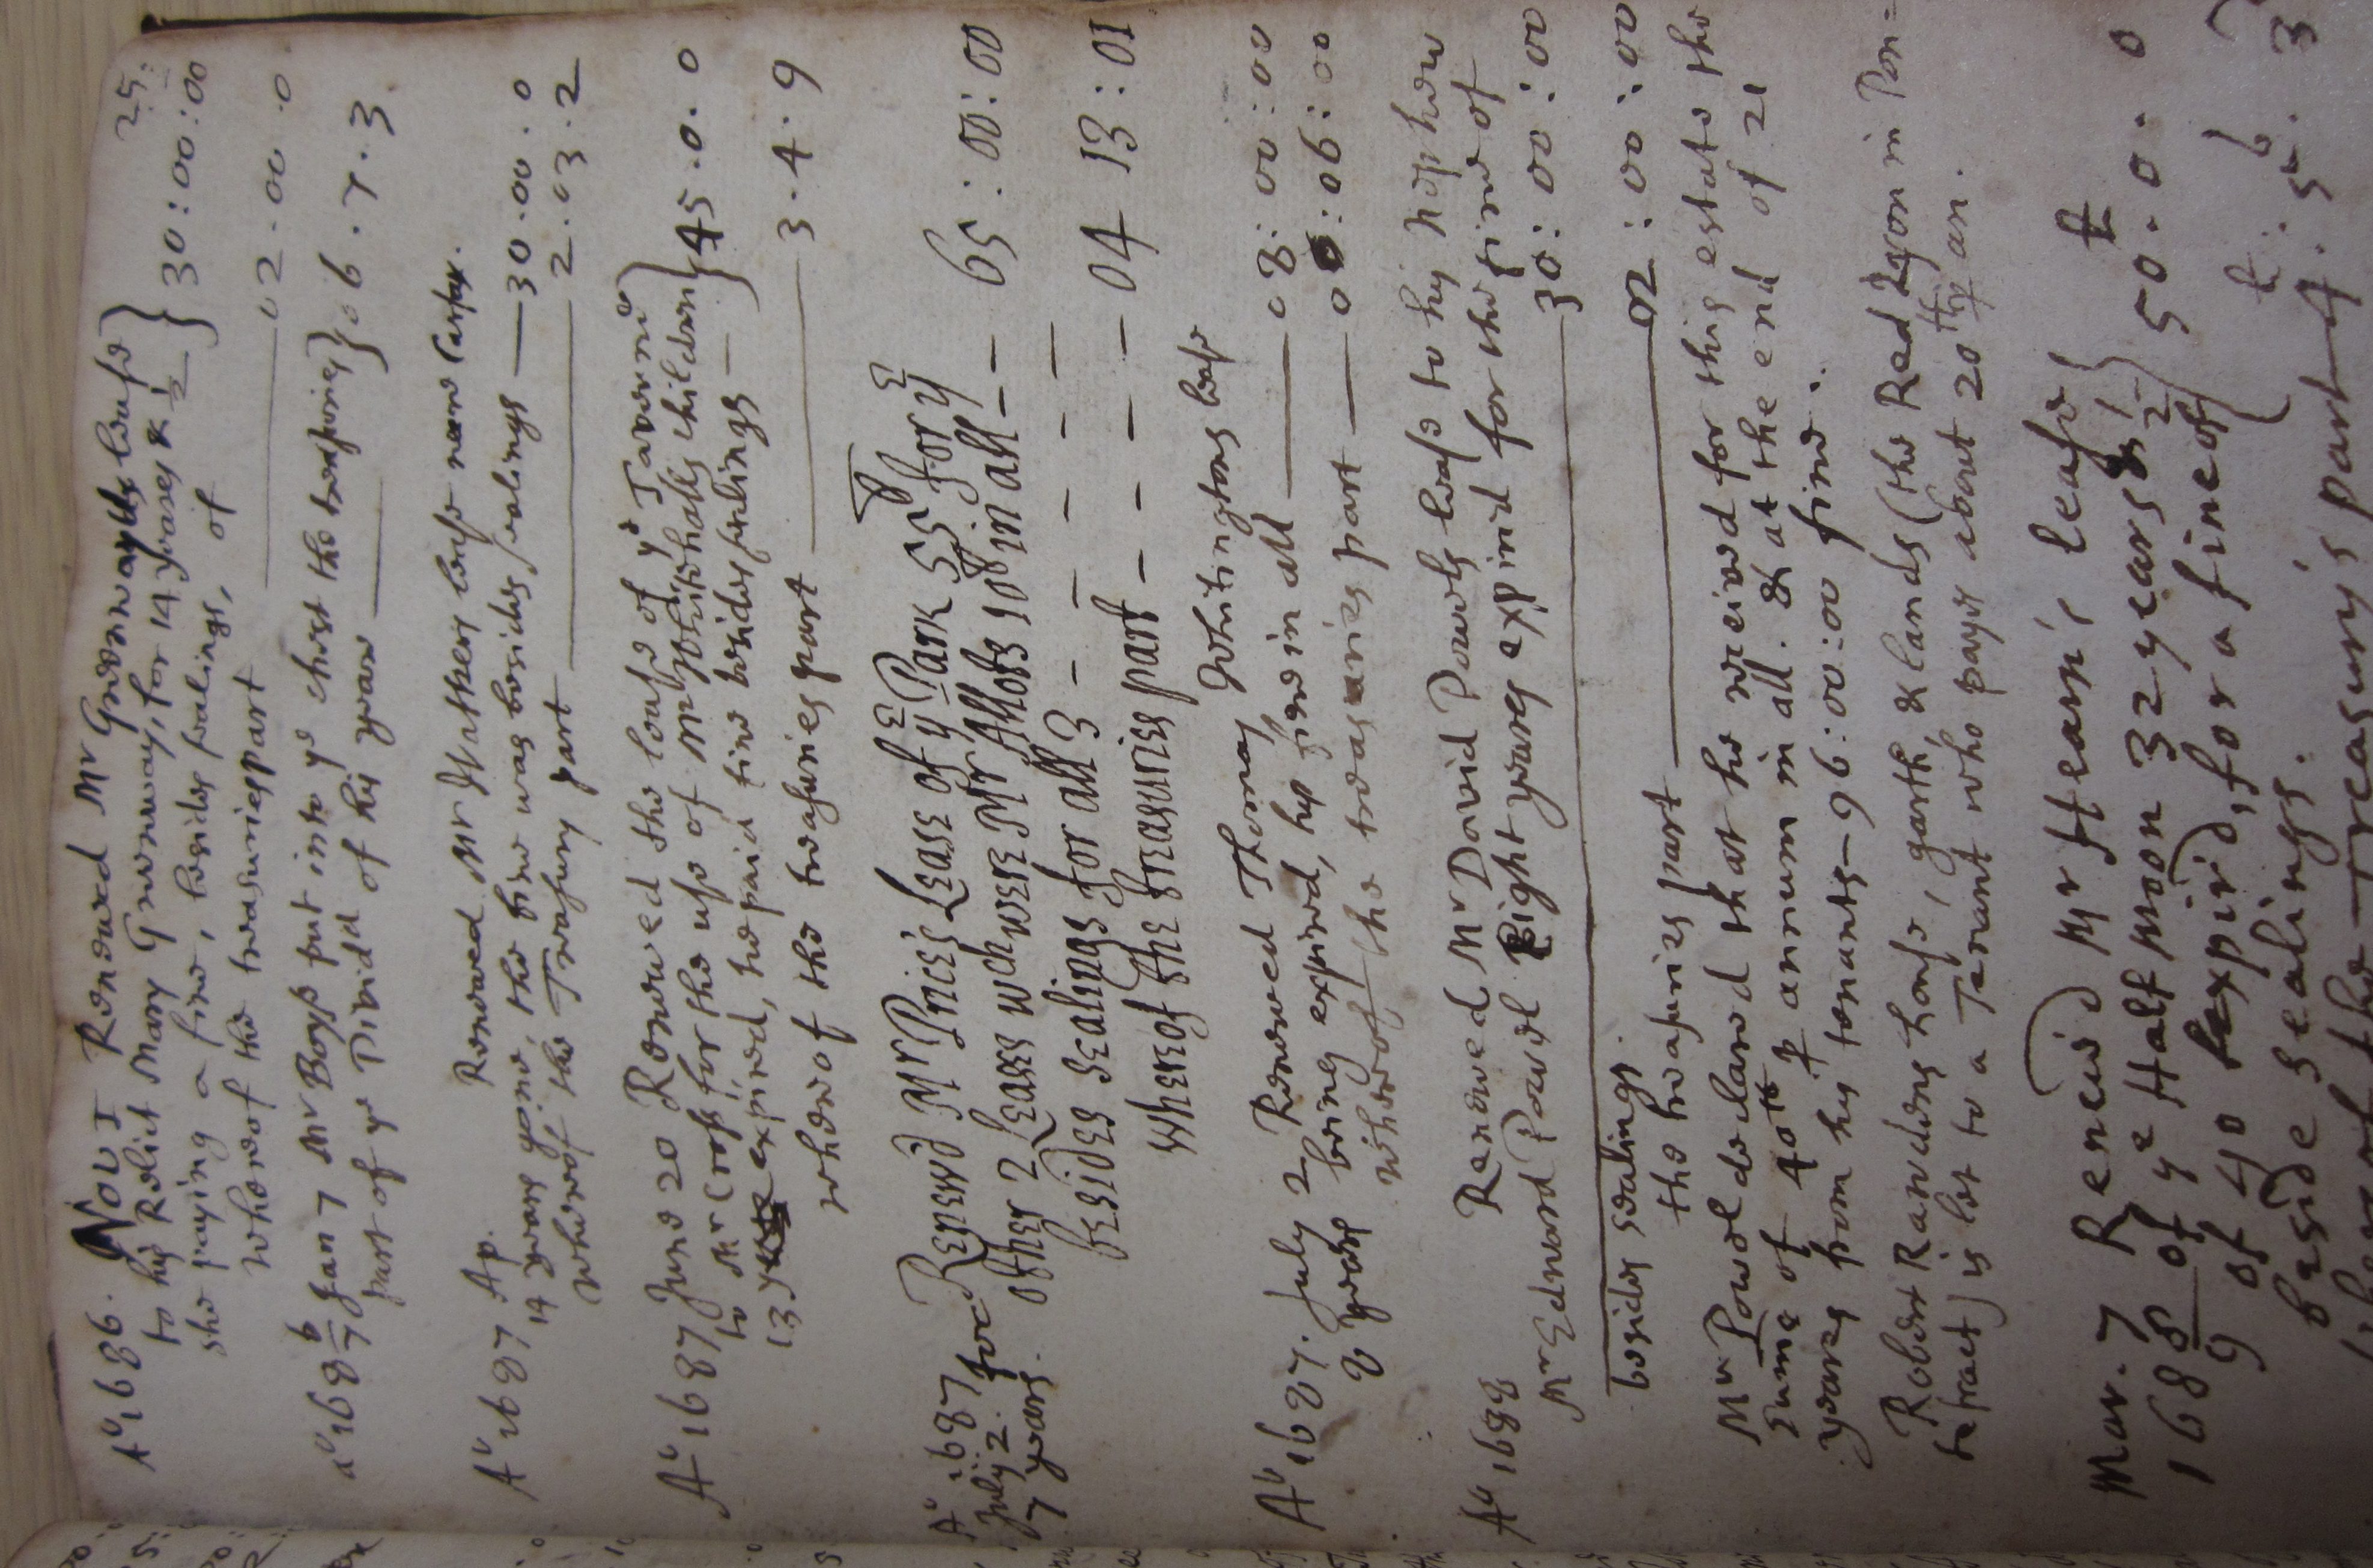 Extract for the 1680s from a register recording the payments of entry fines to University College, Oxford